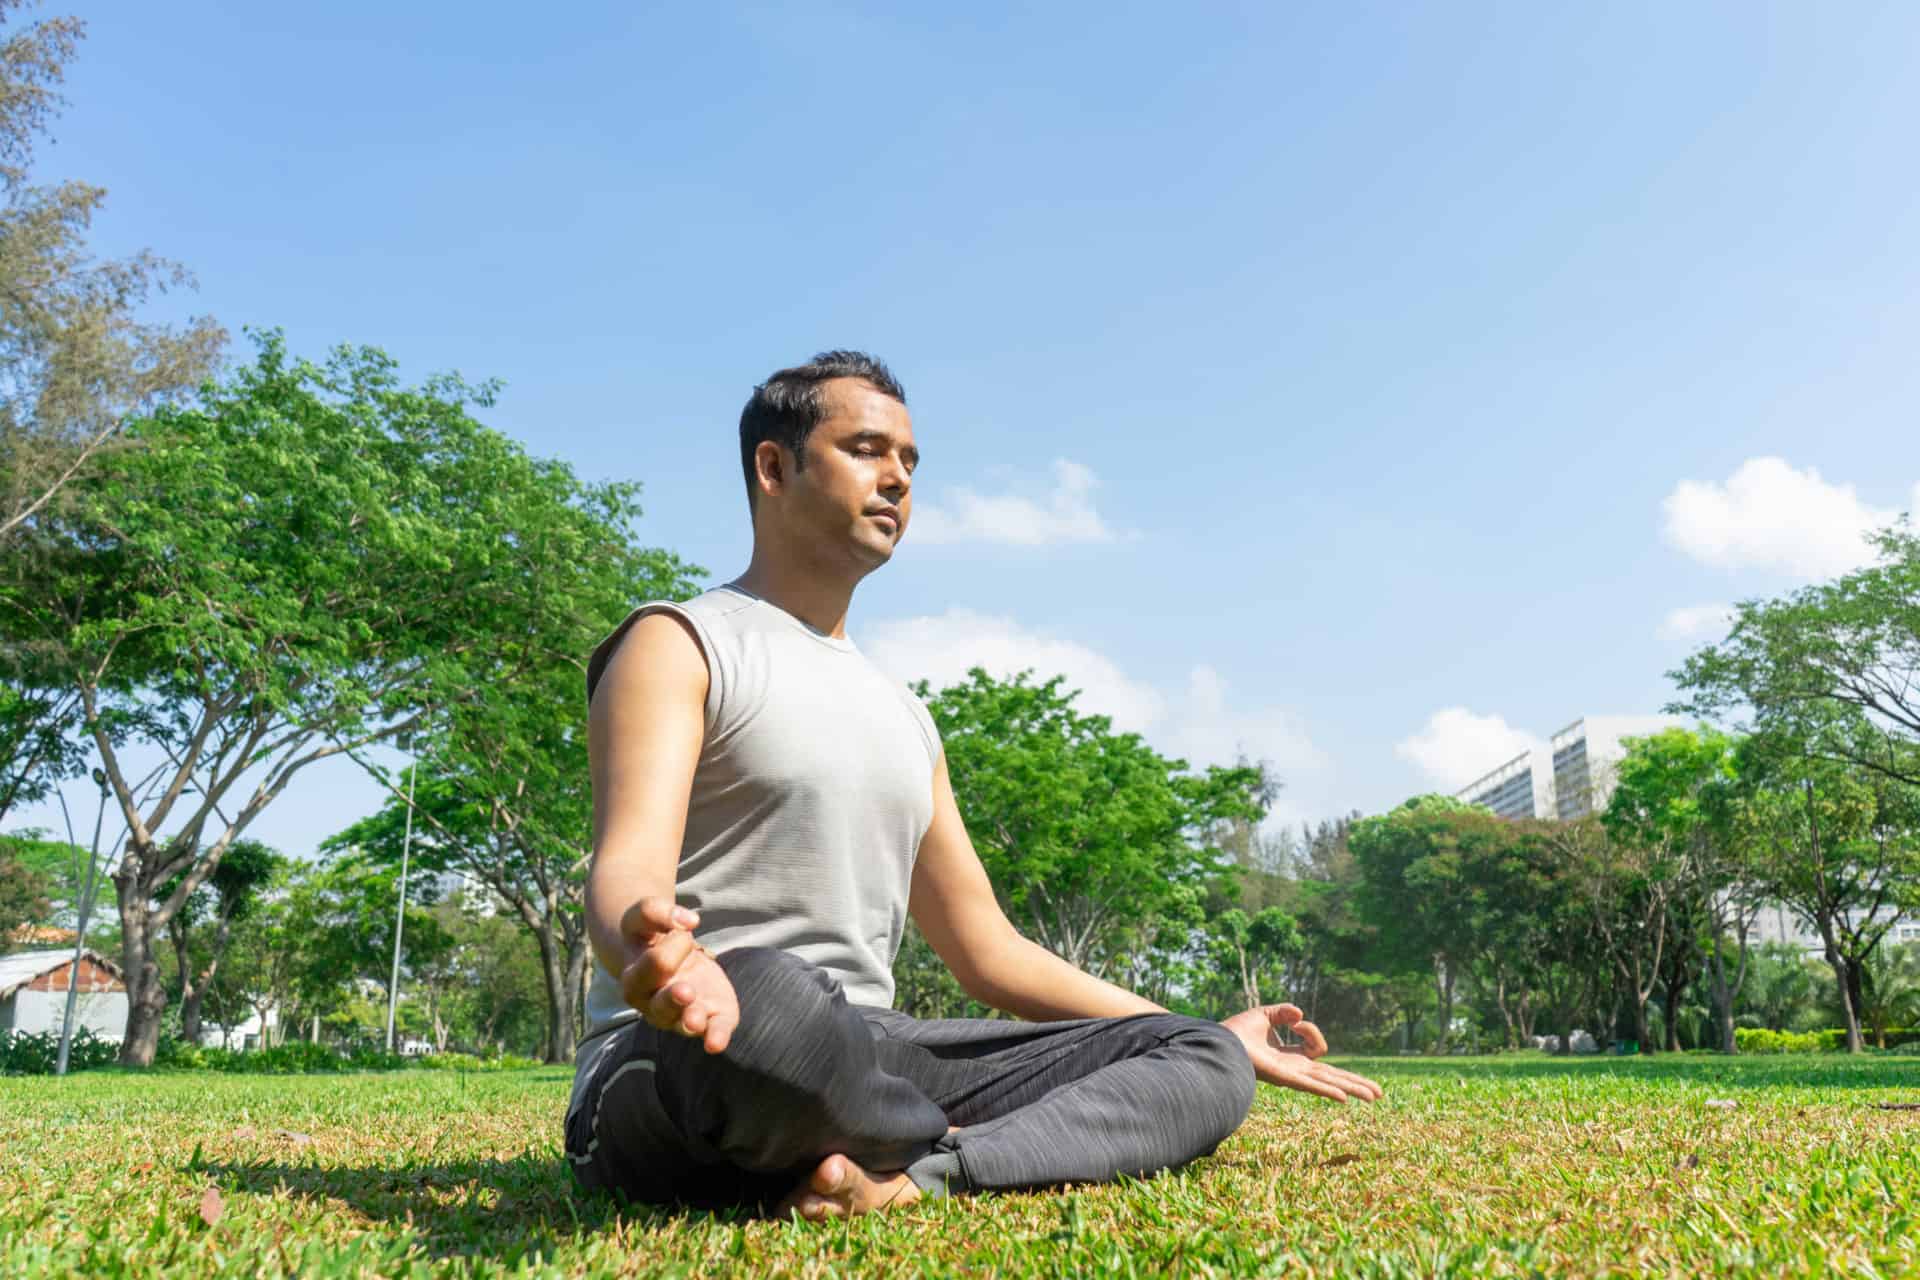 Indian man meditating in lotus pose outdoors on summer lawn with trees in background. Outdoor yoga concept.